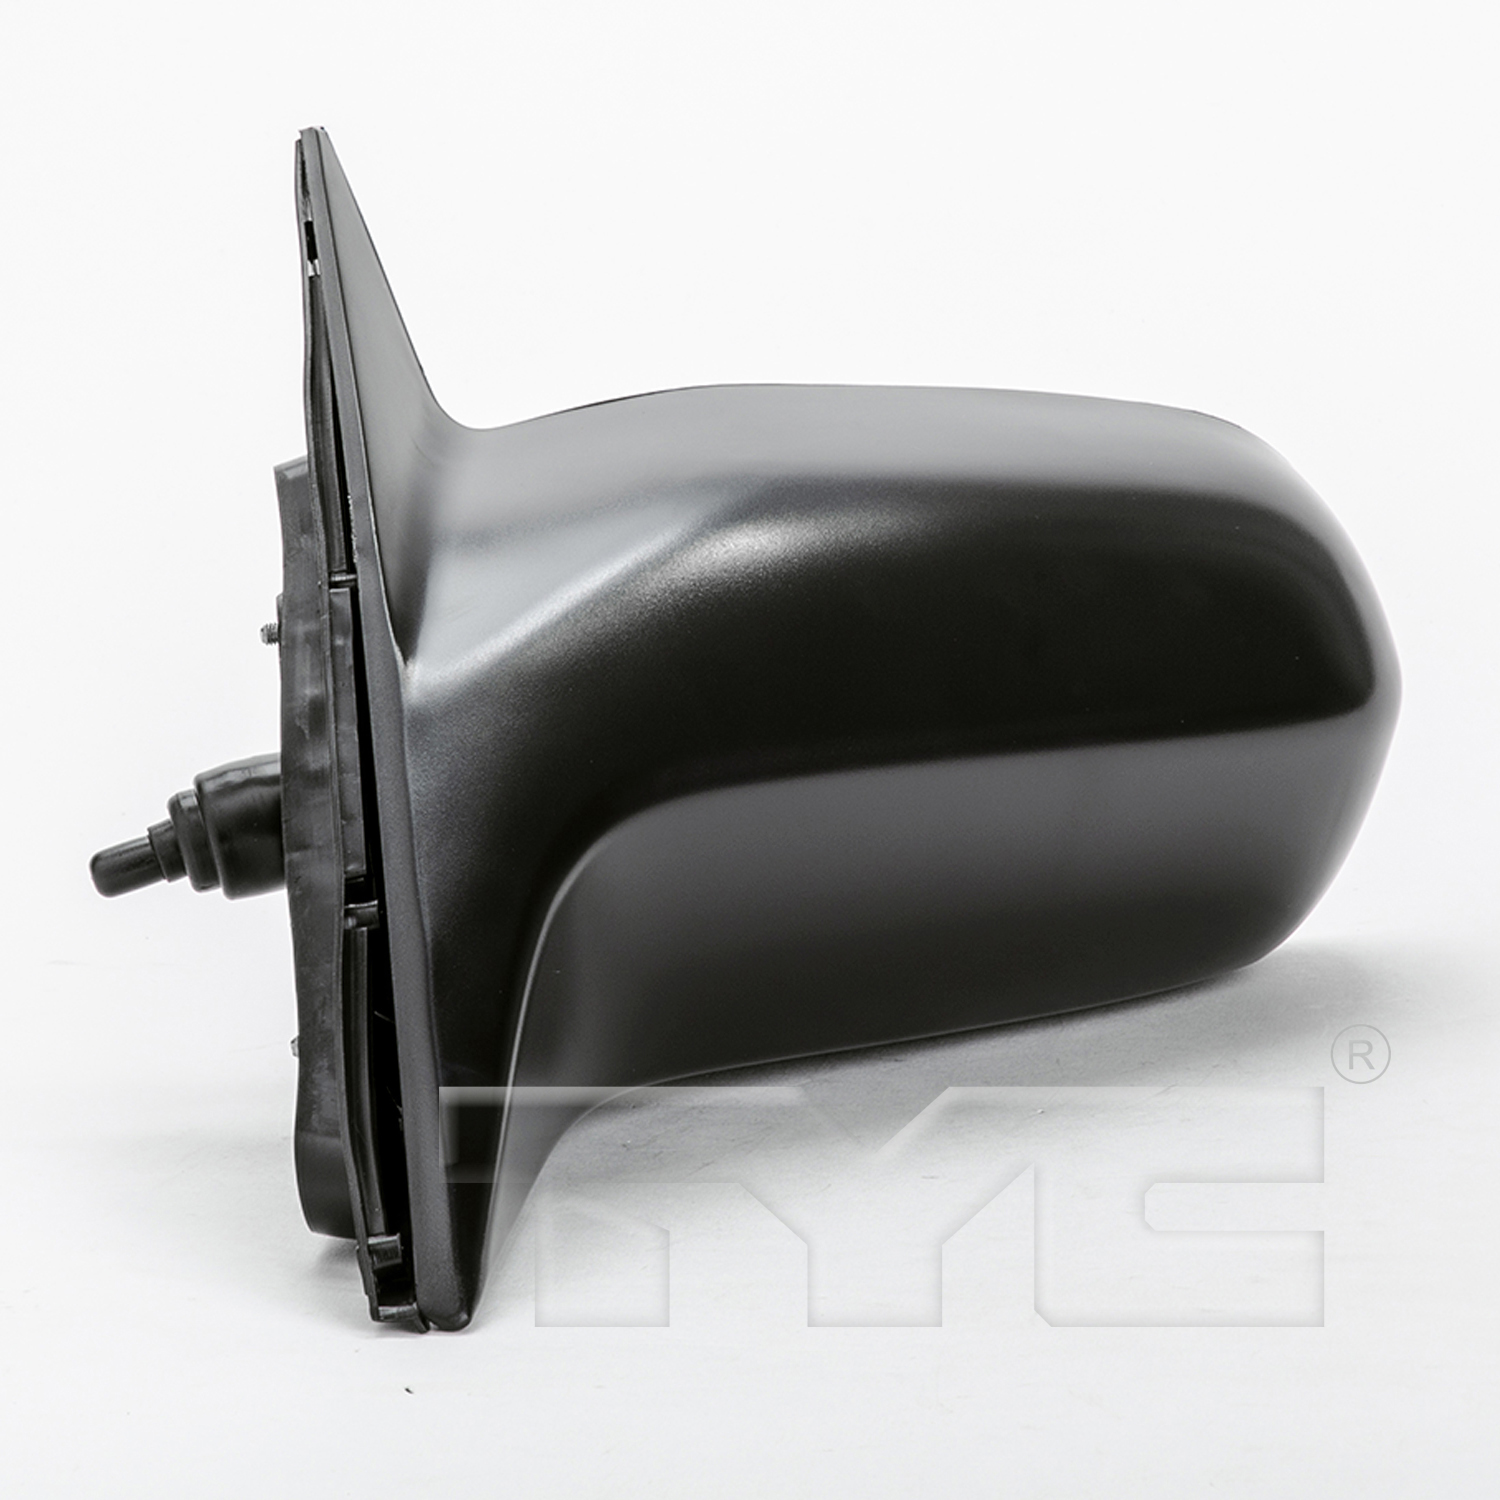 Aftermarket MIRRORS for HONDA - CIVIC, CIVIC,01-05,LT Mirror outside rear view